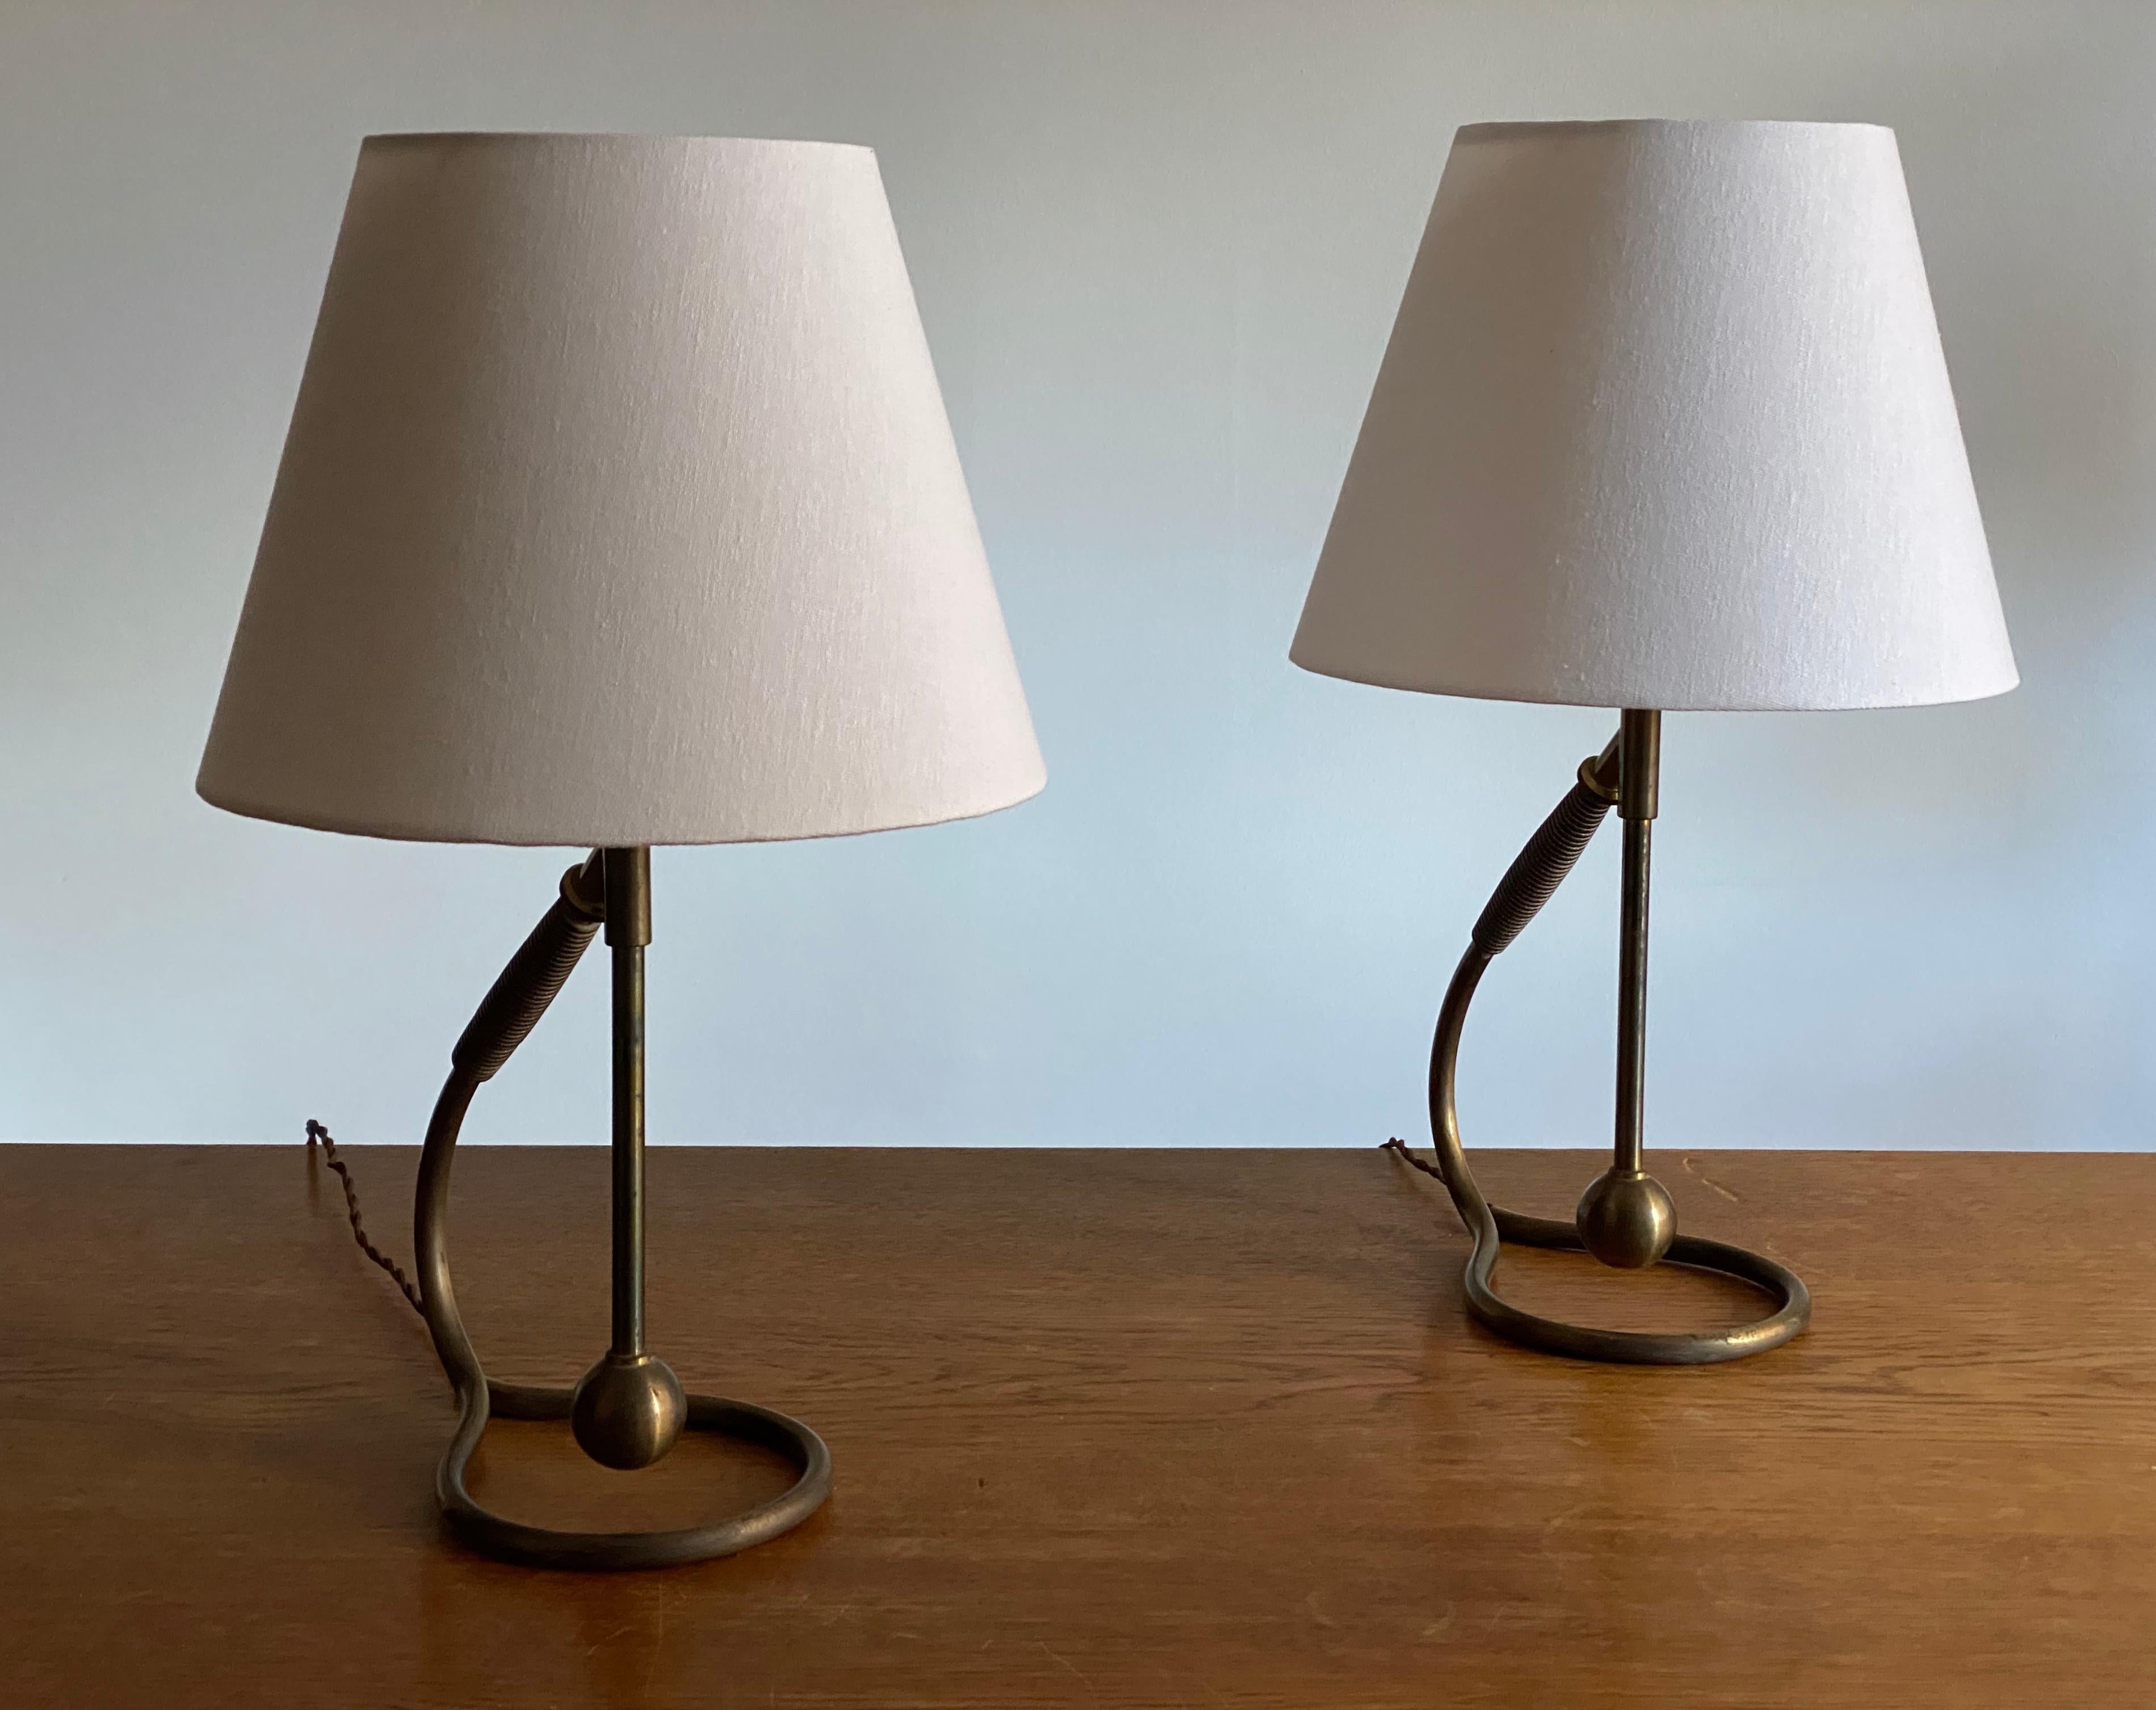 A pair of organic and adjustable table lamps. Designed and produced in Italy, 1940s. In a highly intricate and sculptural form.

Lampshades are attached for illustration and are not included in the purchase. Dimensions stated are excluding